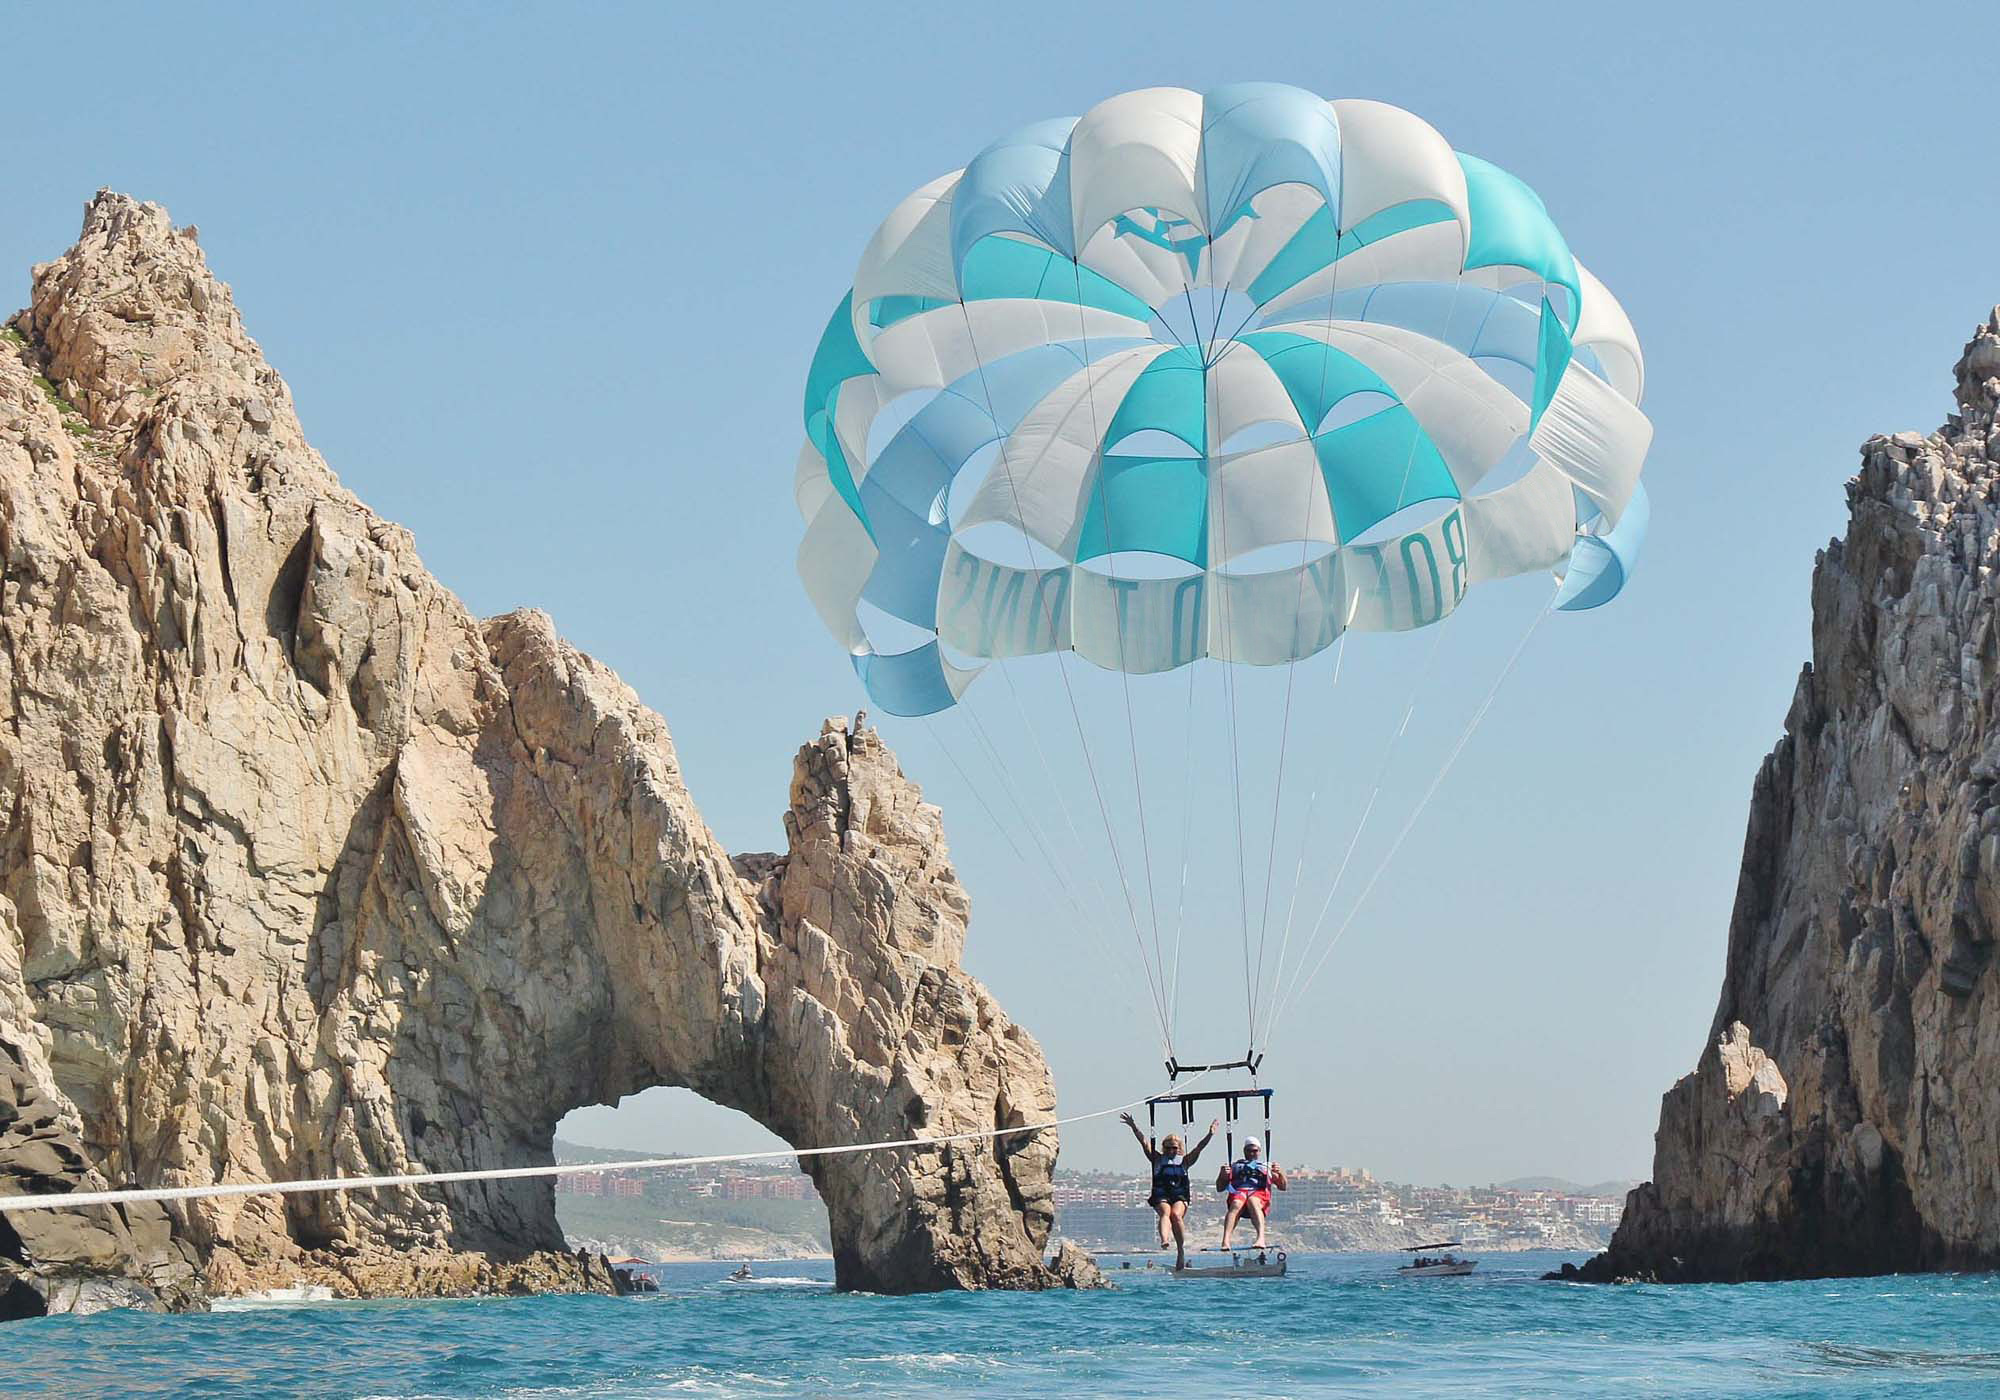 Parasailing: Cabo San Lucas, Water activities, The flyers take off upwards, Breathtaking views of the coastline, Los Cabos. 2000x1400 HD Wallpaper.